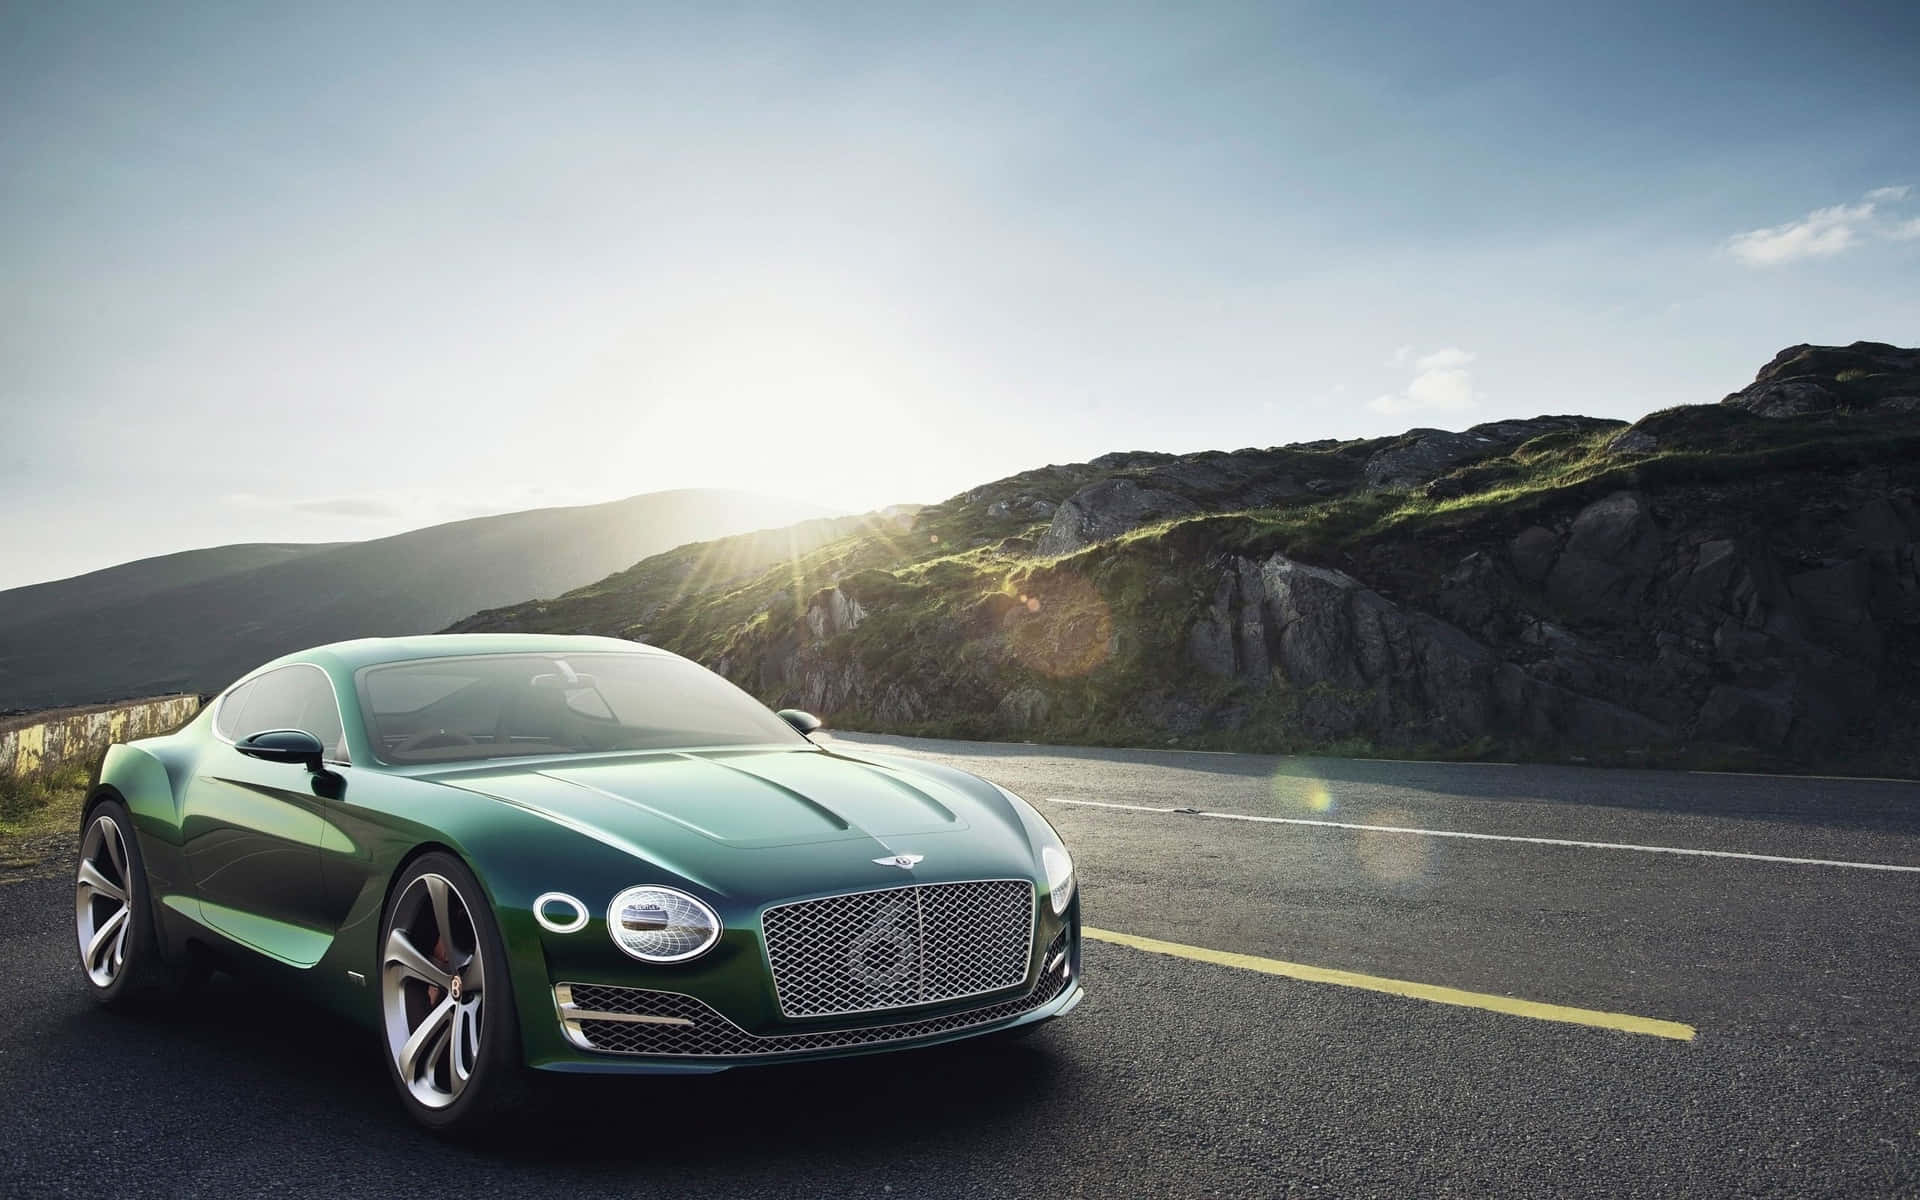 The Best of Luxury – Ride in Style with a Bentley